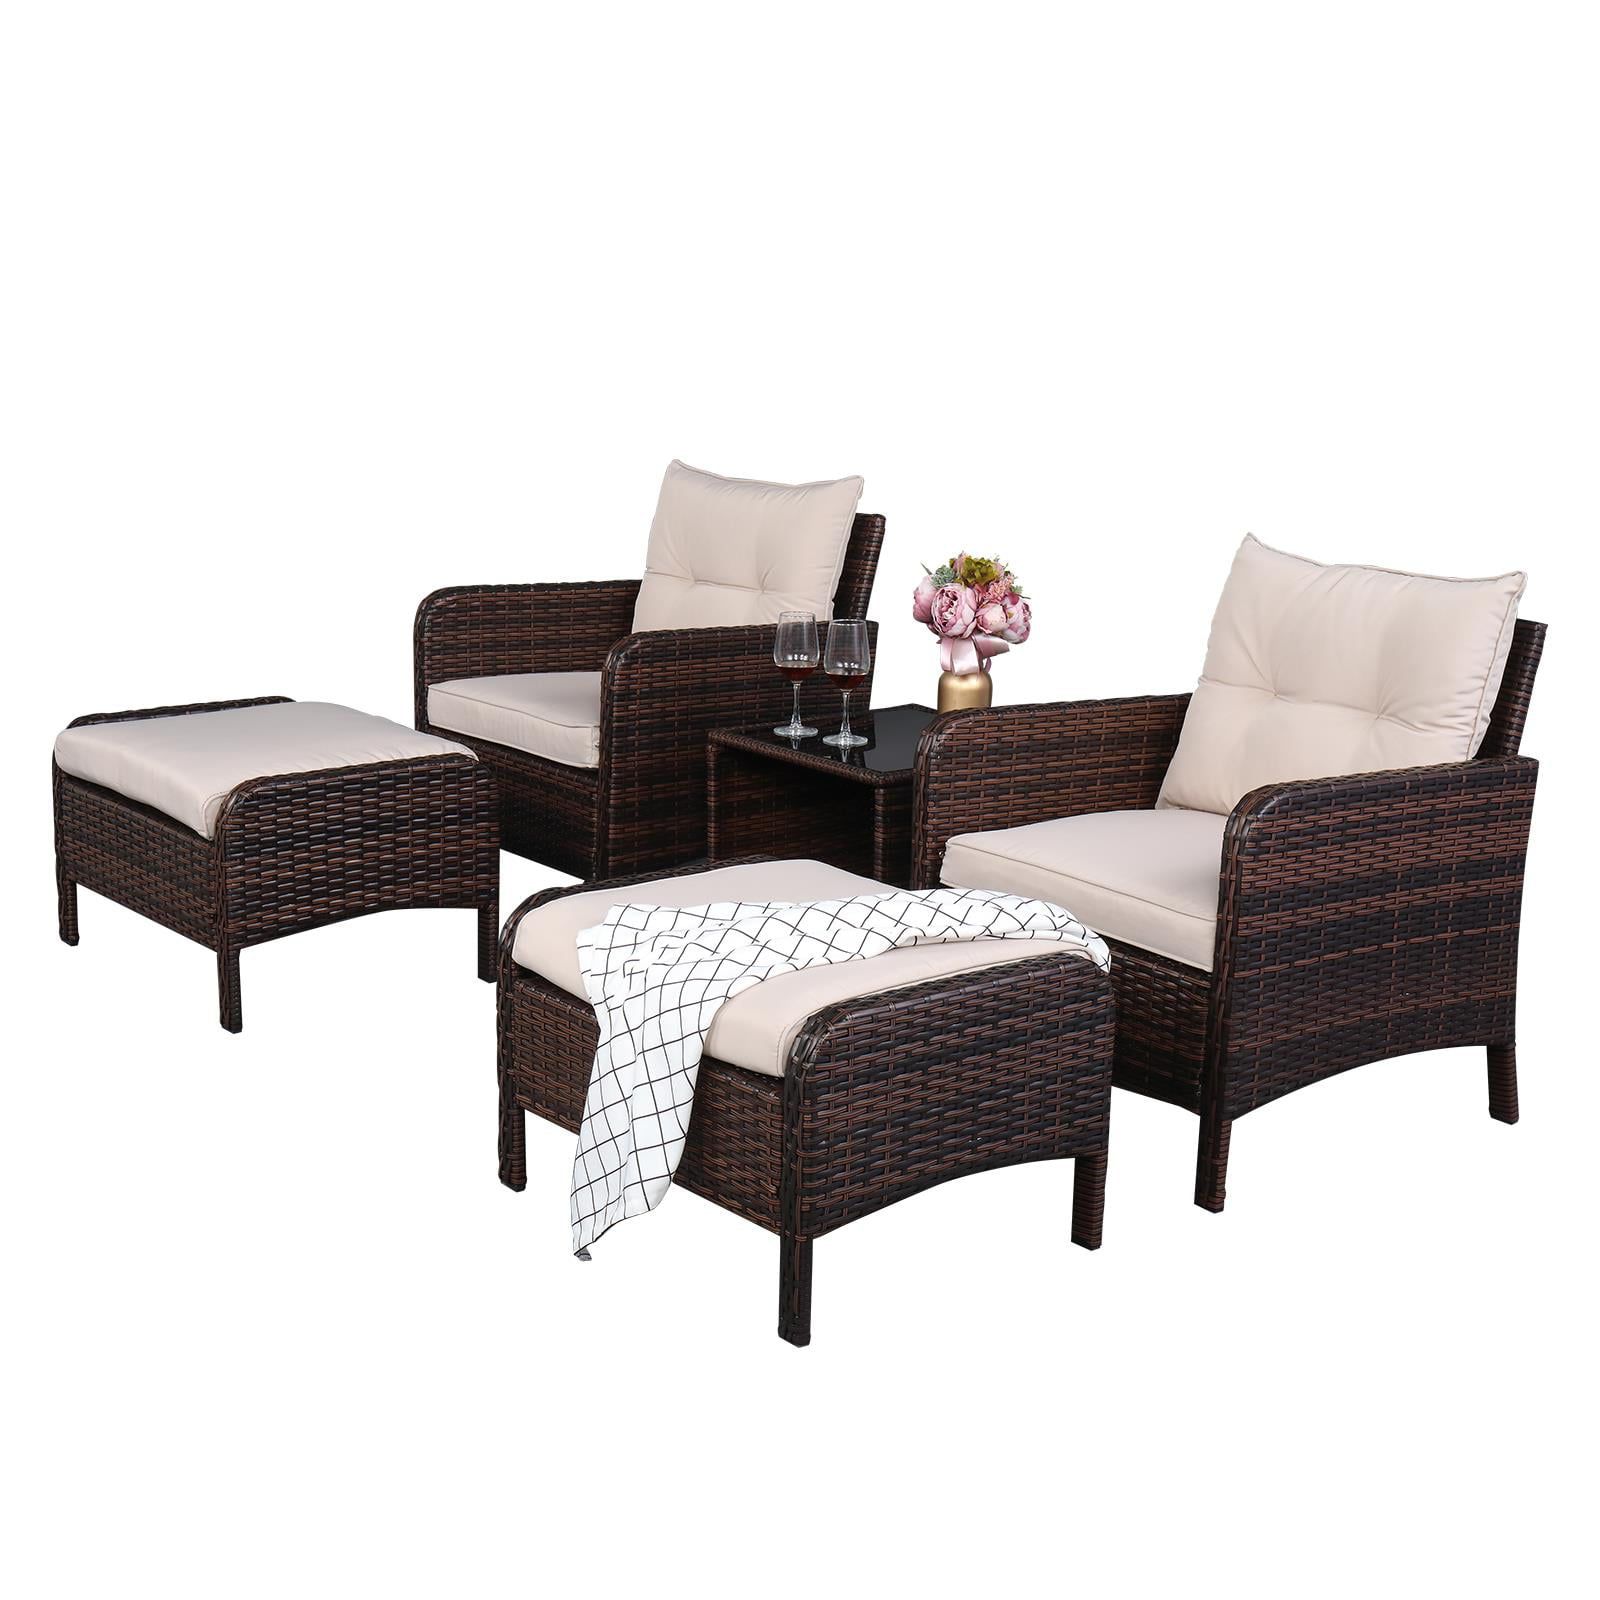 Latest Zimtown 5 Piece Outdoor Patio Furniture Set With Ottomans And Side Table, Iron  Frame – Walmart For Side Table Iron Frame Patio Furniture Set (View 4 of 15)